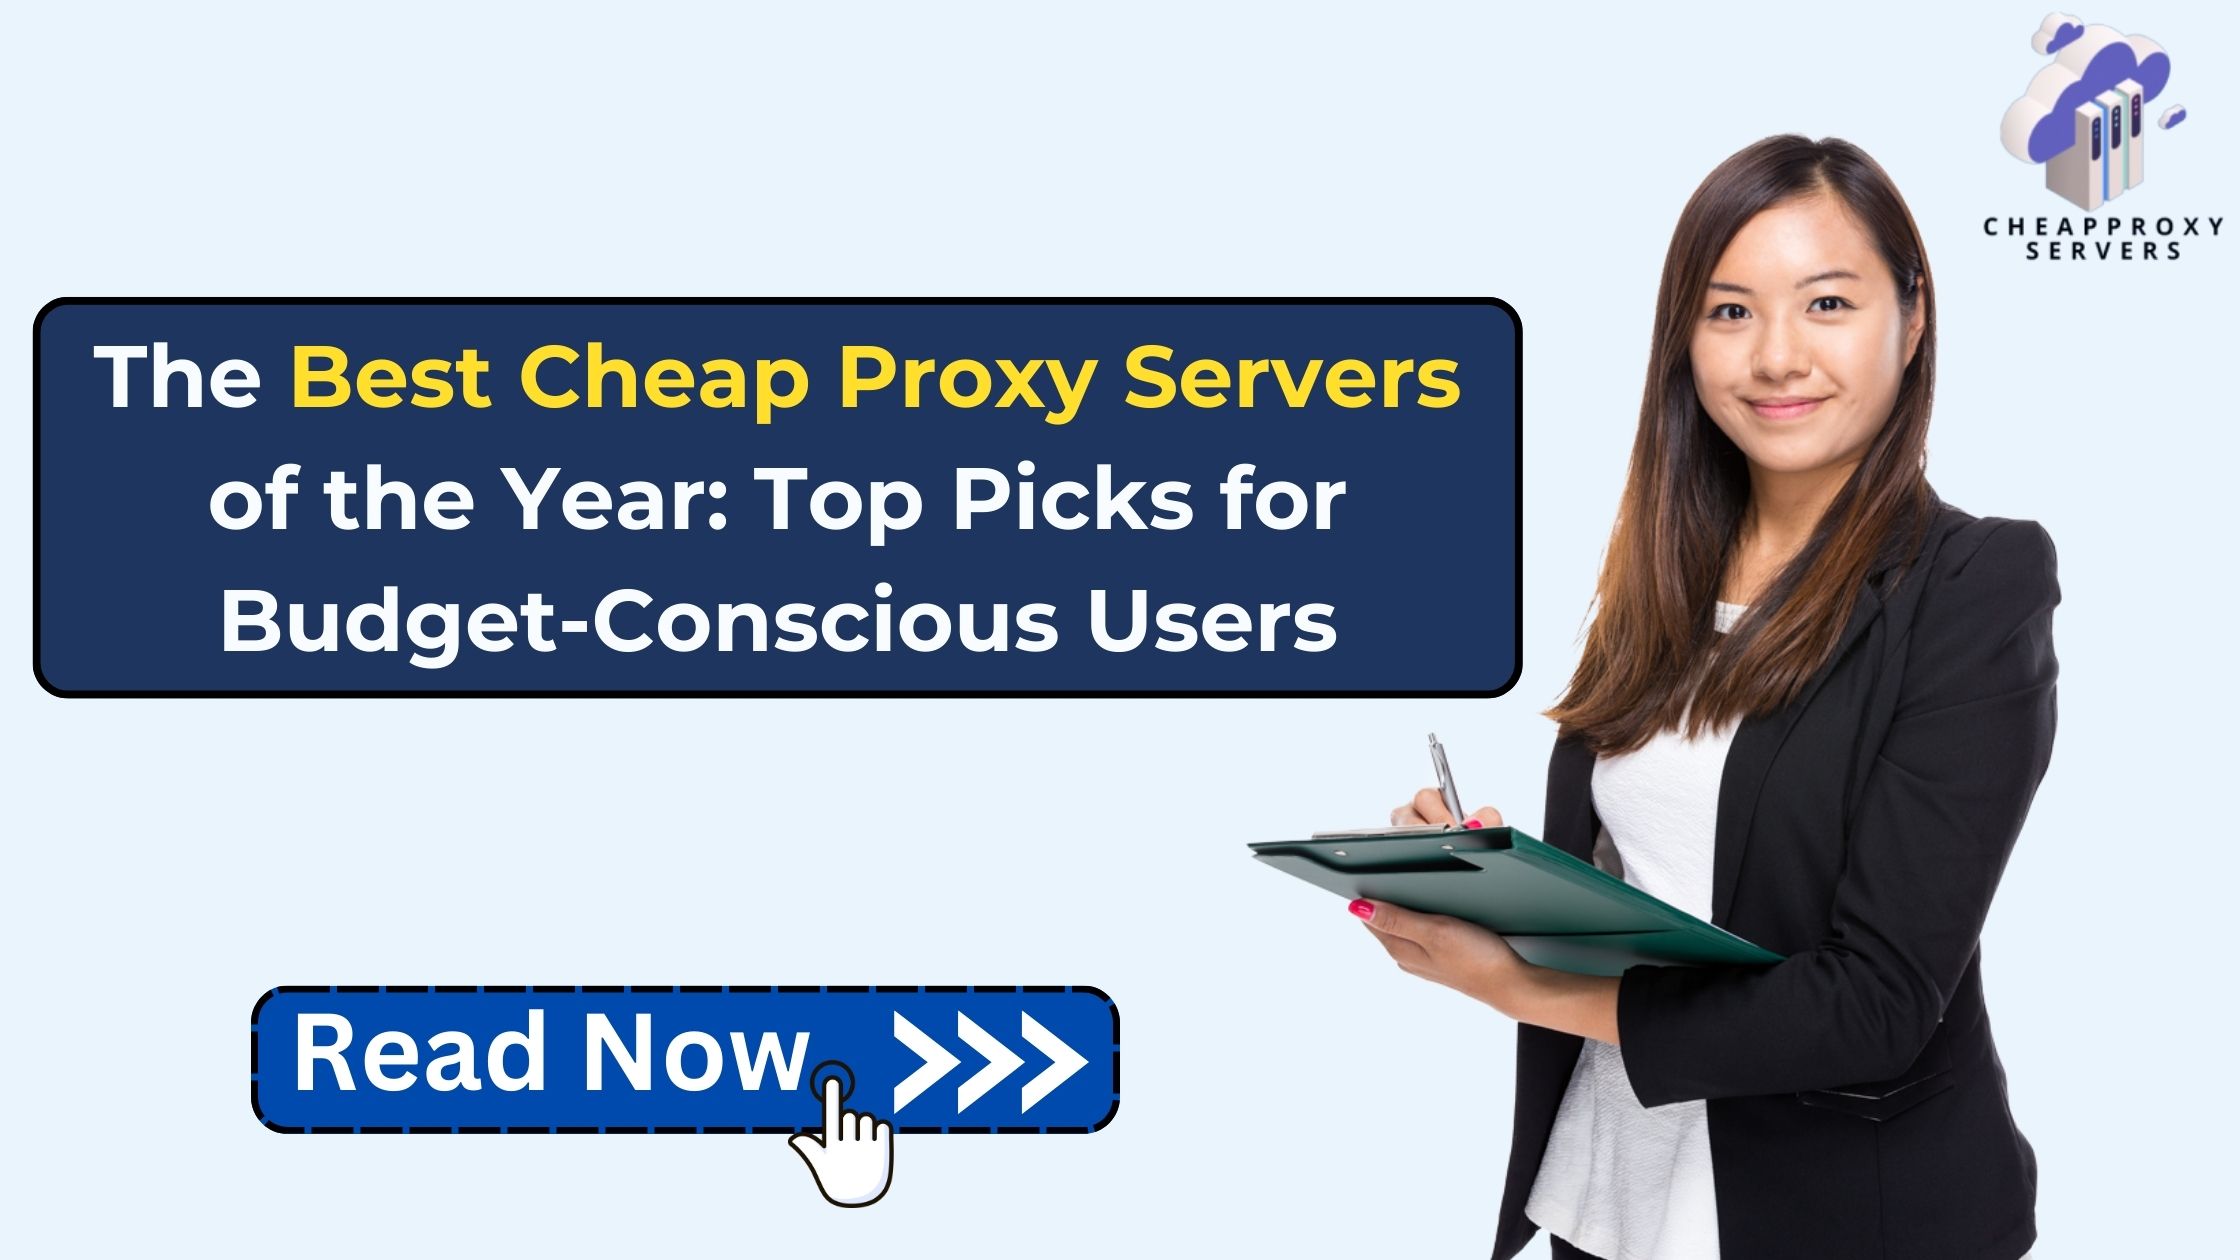 The Best Cheap Proxy Servers of the Year